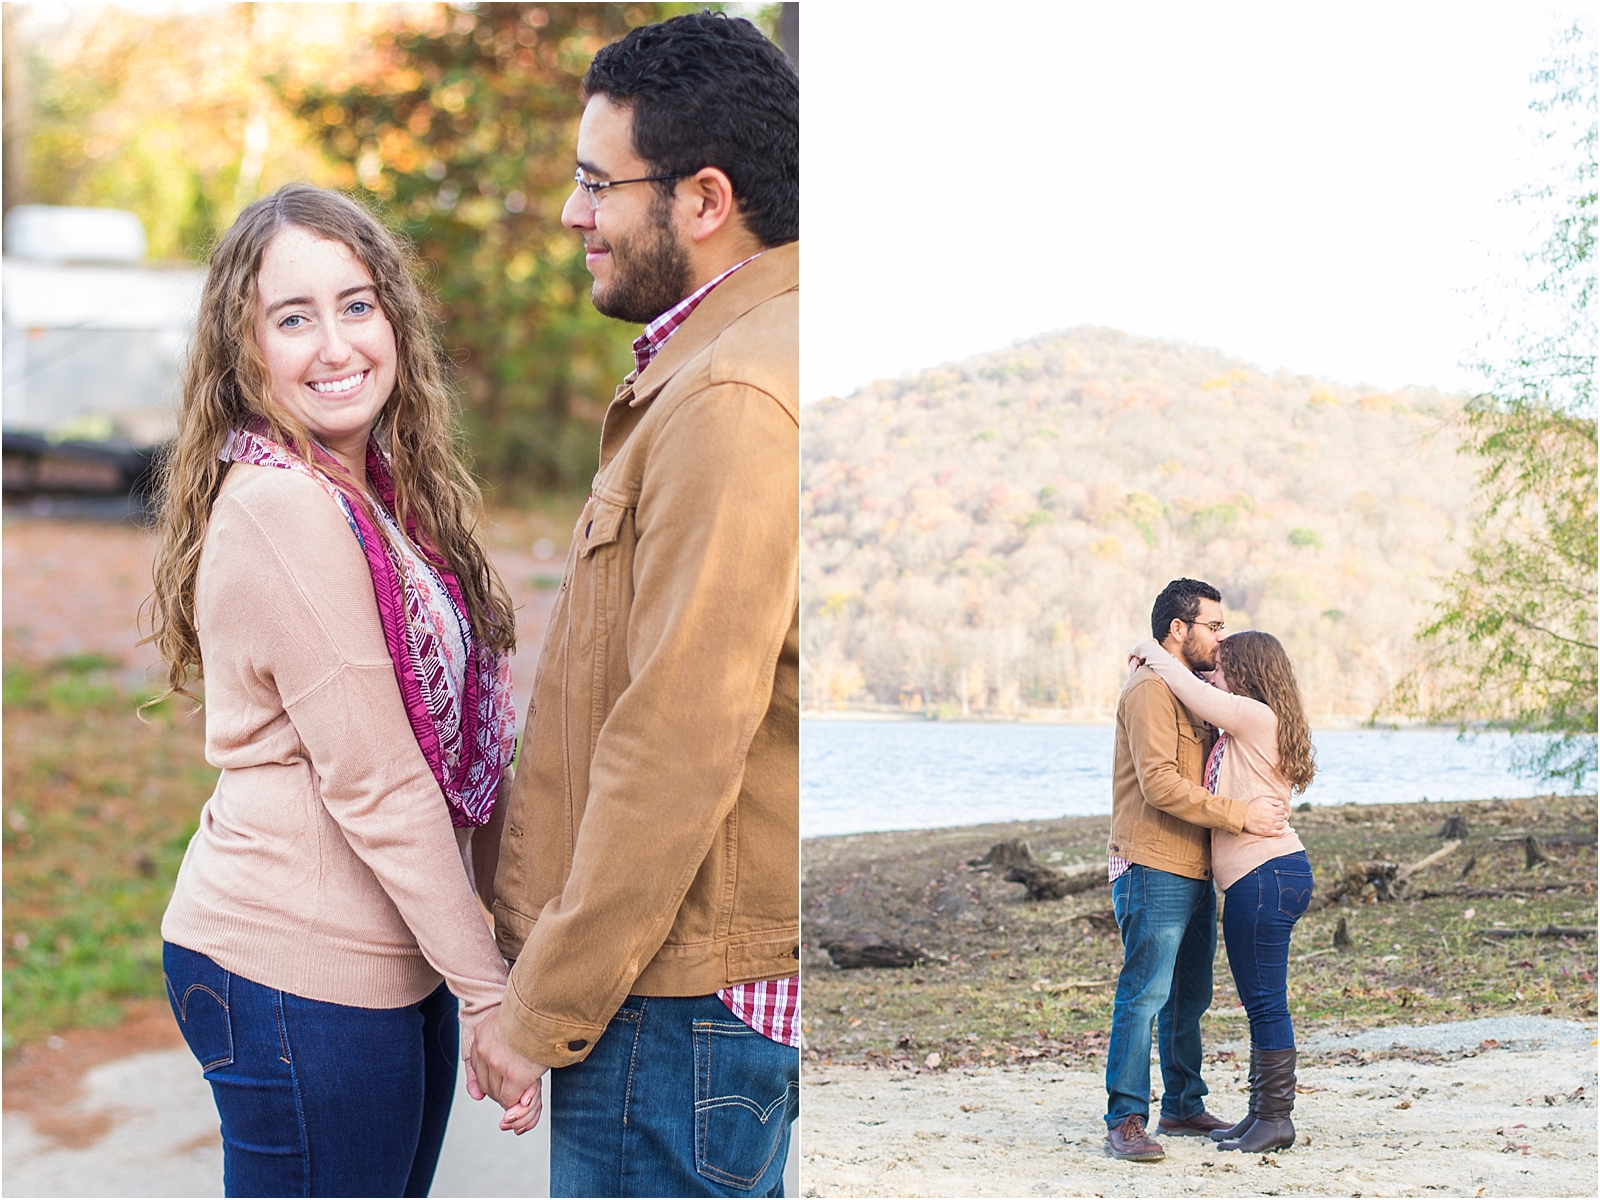 Adam and Ashley - Johnstown, PA engagement session